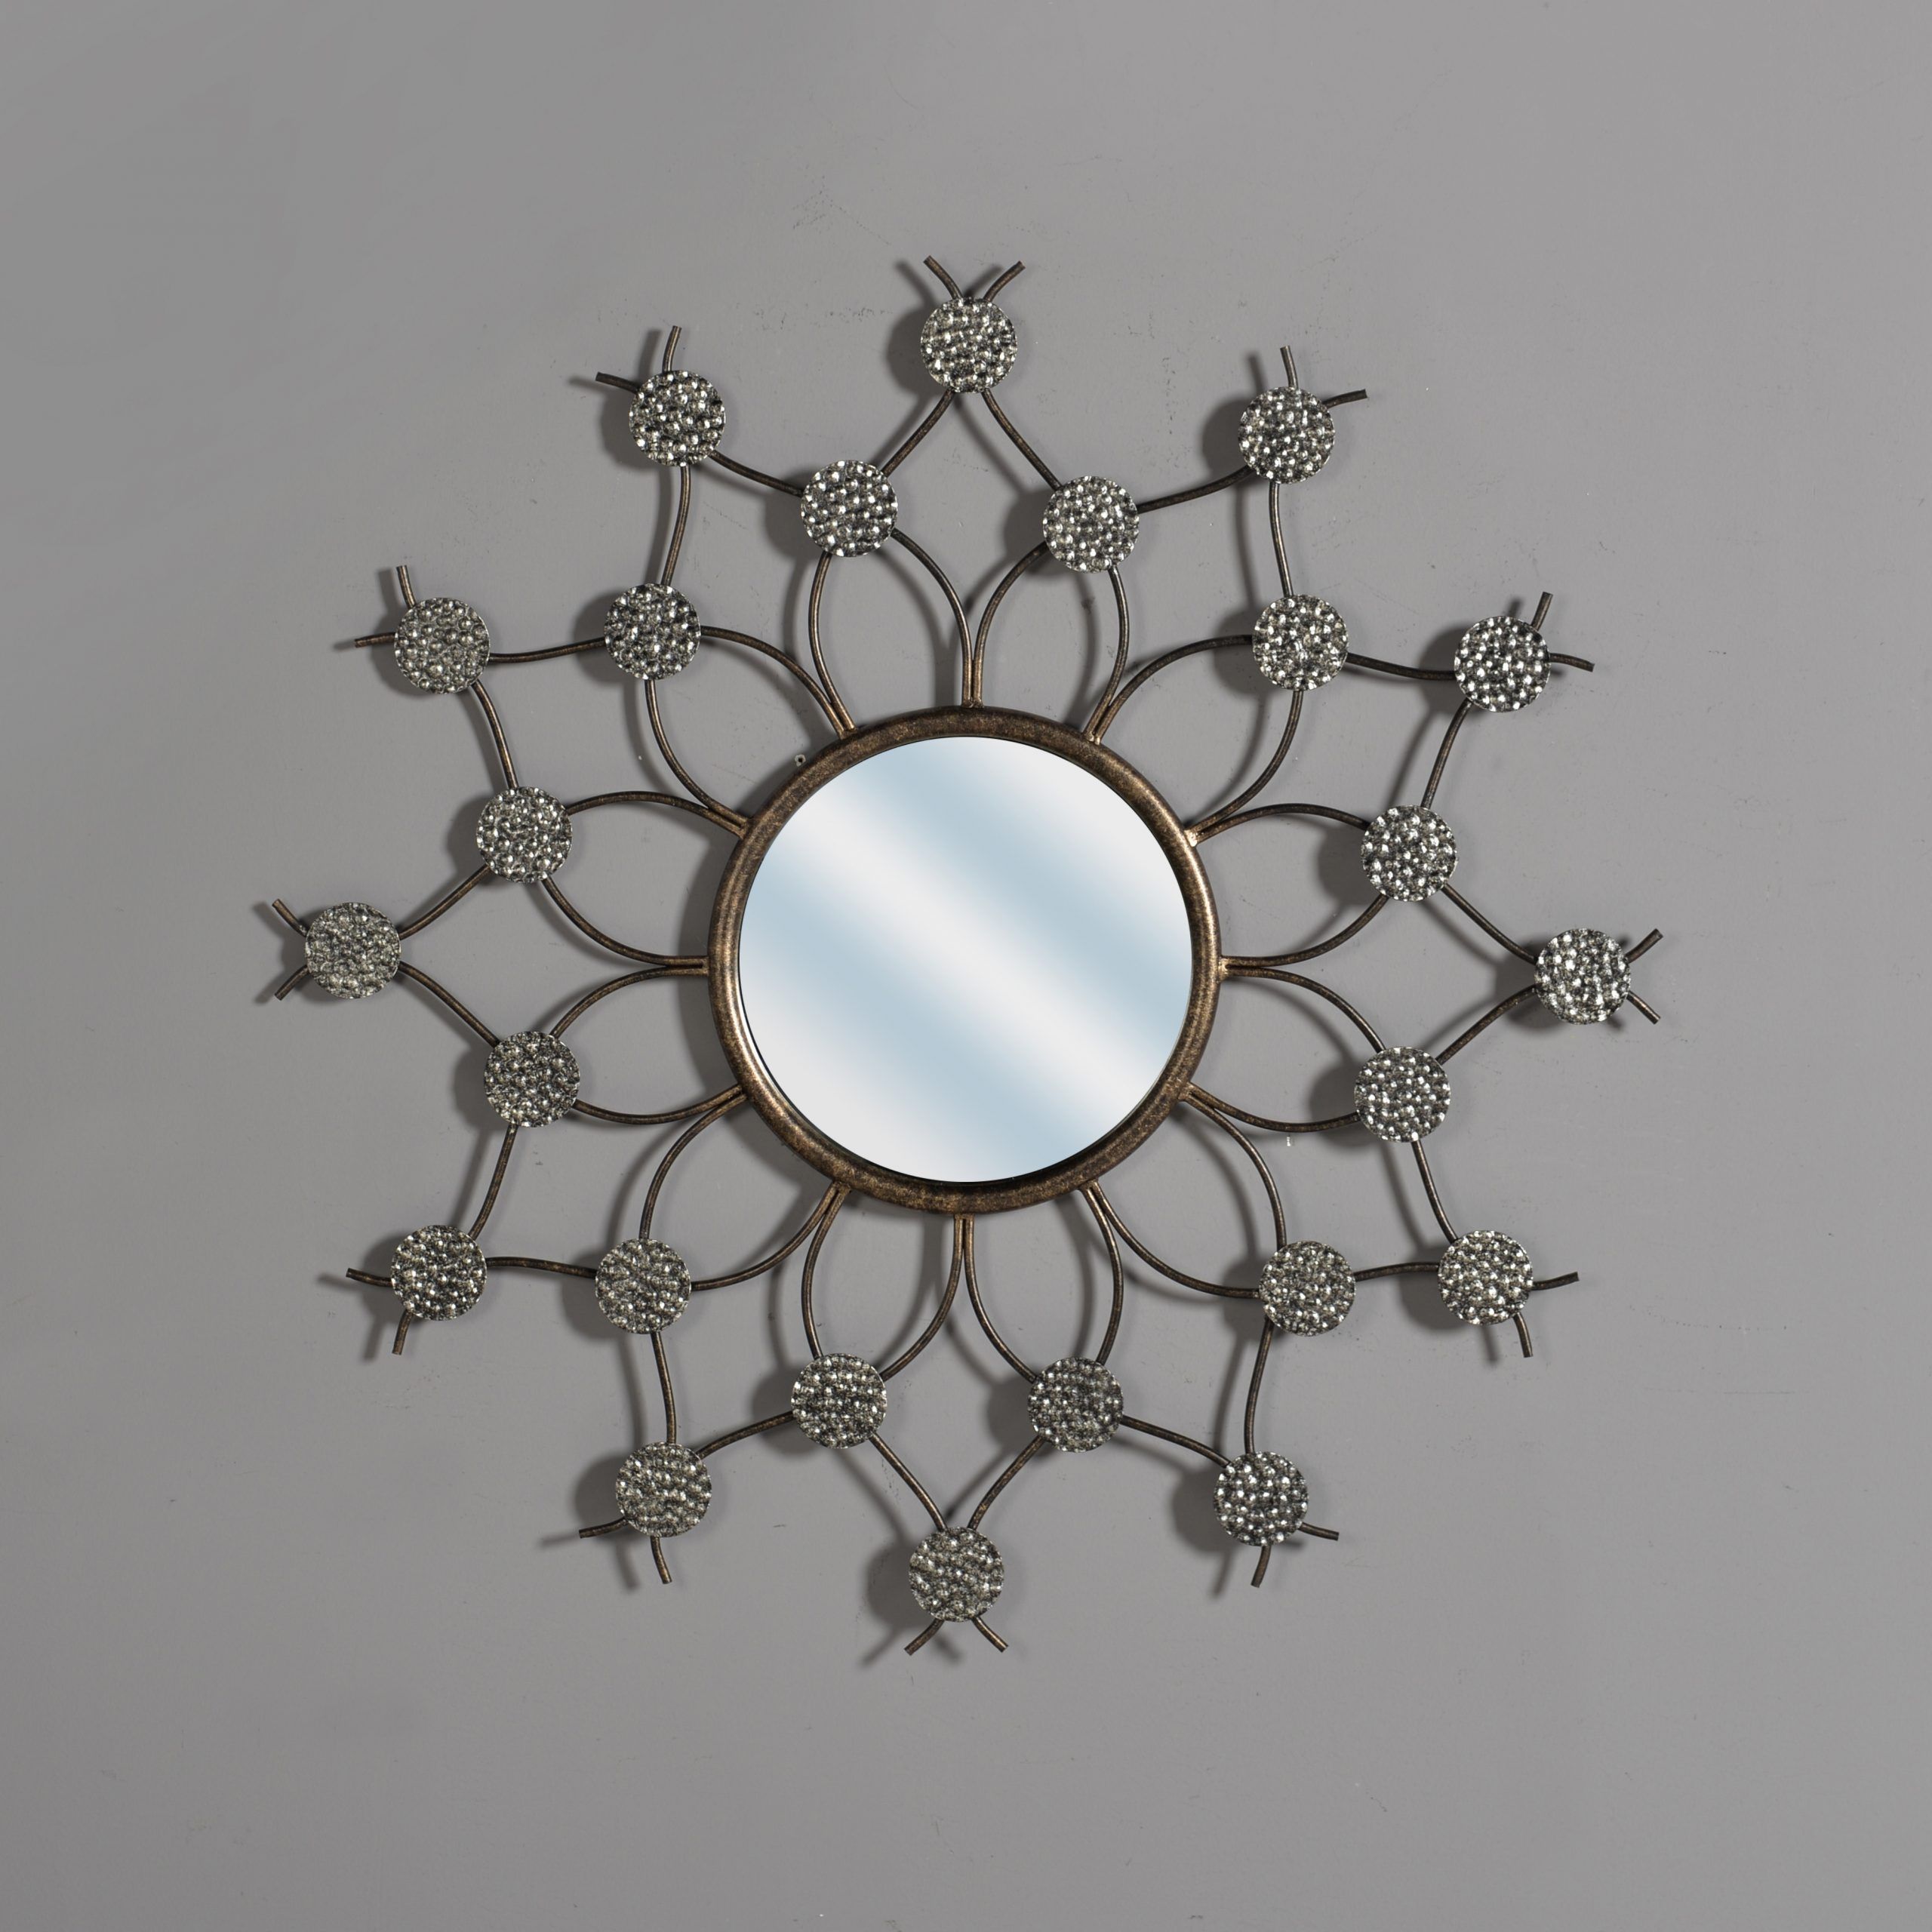 Mayco Antique Sunburst Metal Frame Decorative Wall Mirror With Brass Within Brass Sunburst Wall Mirrors (View 6 of 15)